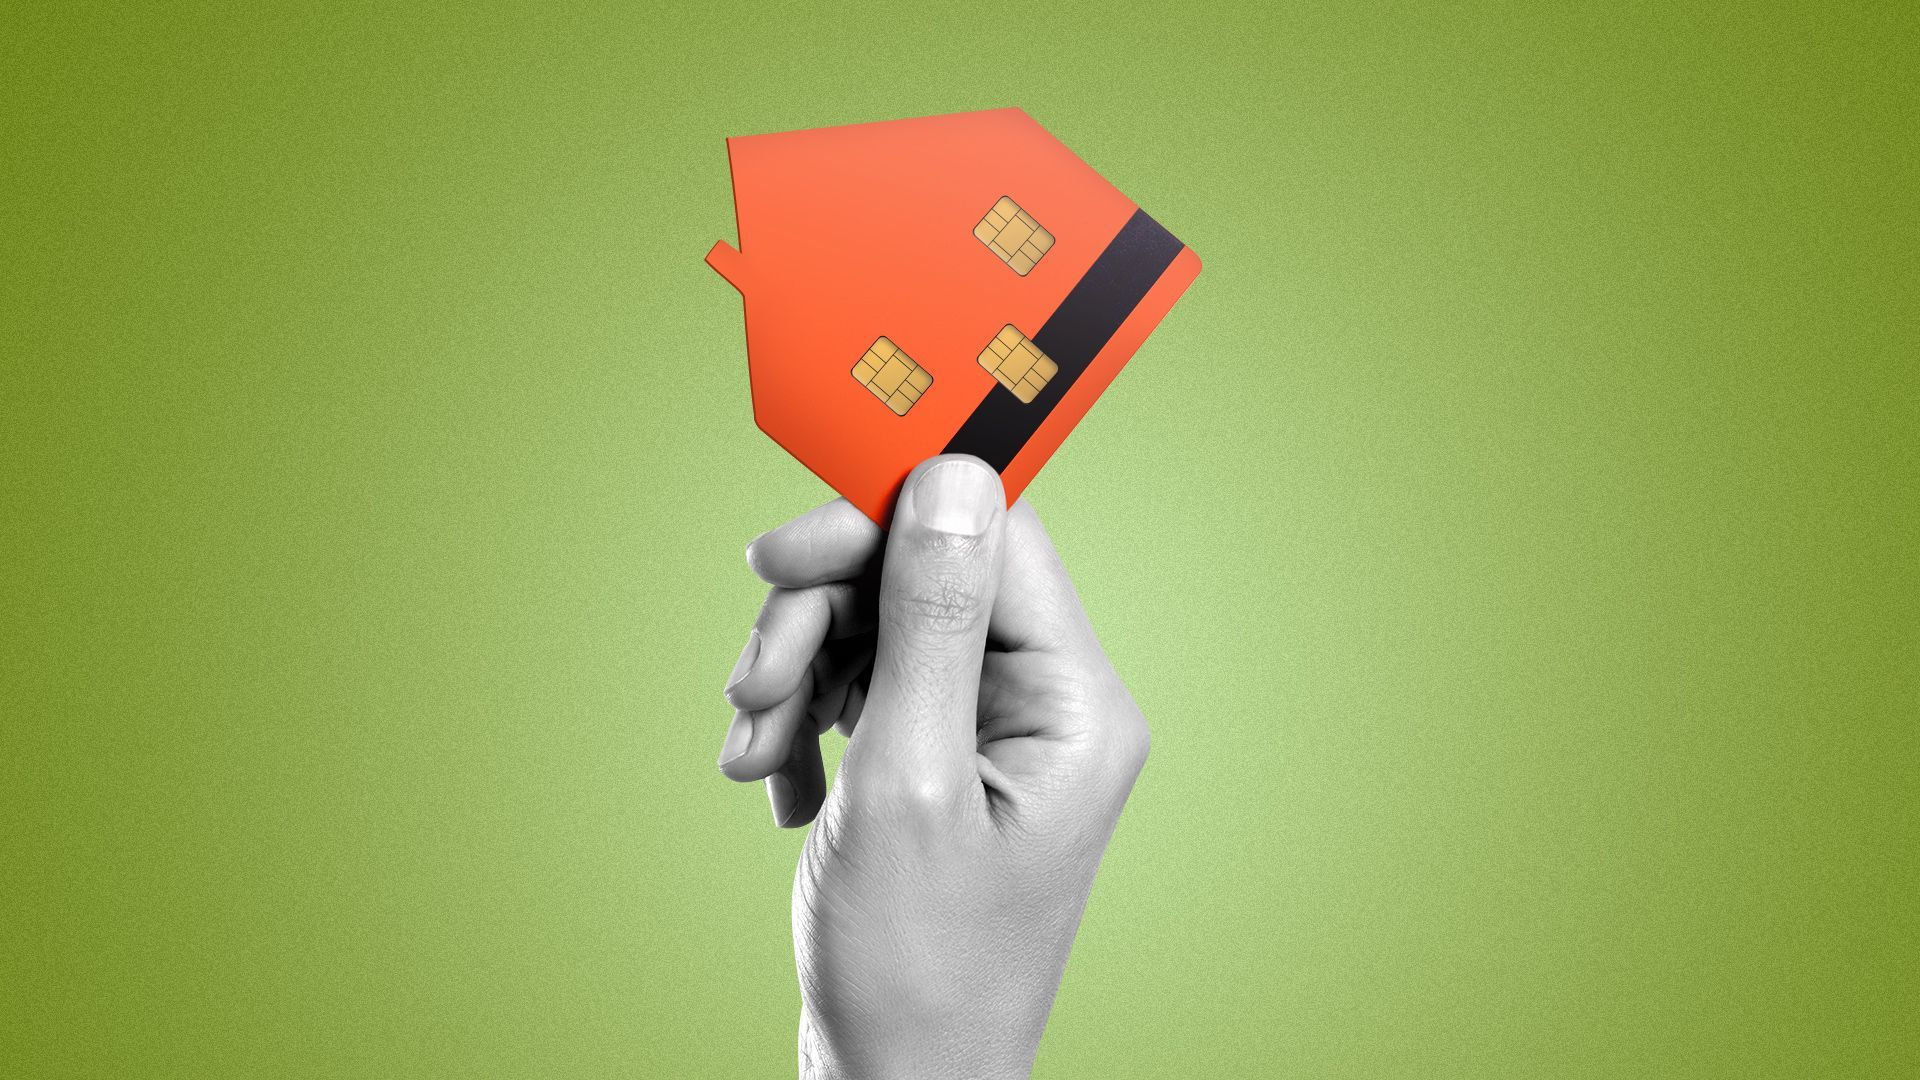 Illustration of a hand holding a credit card shaped like a house with the chips forming windows and a door.